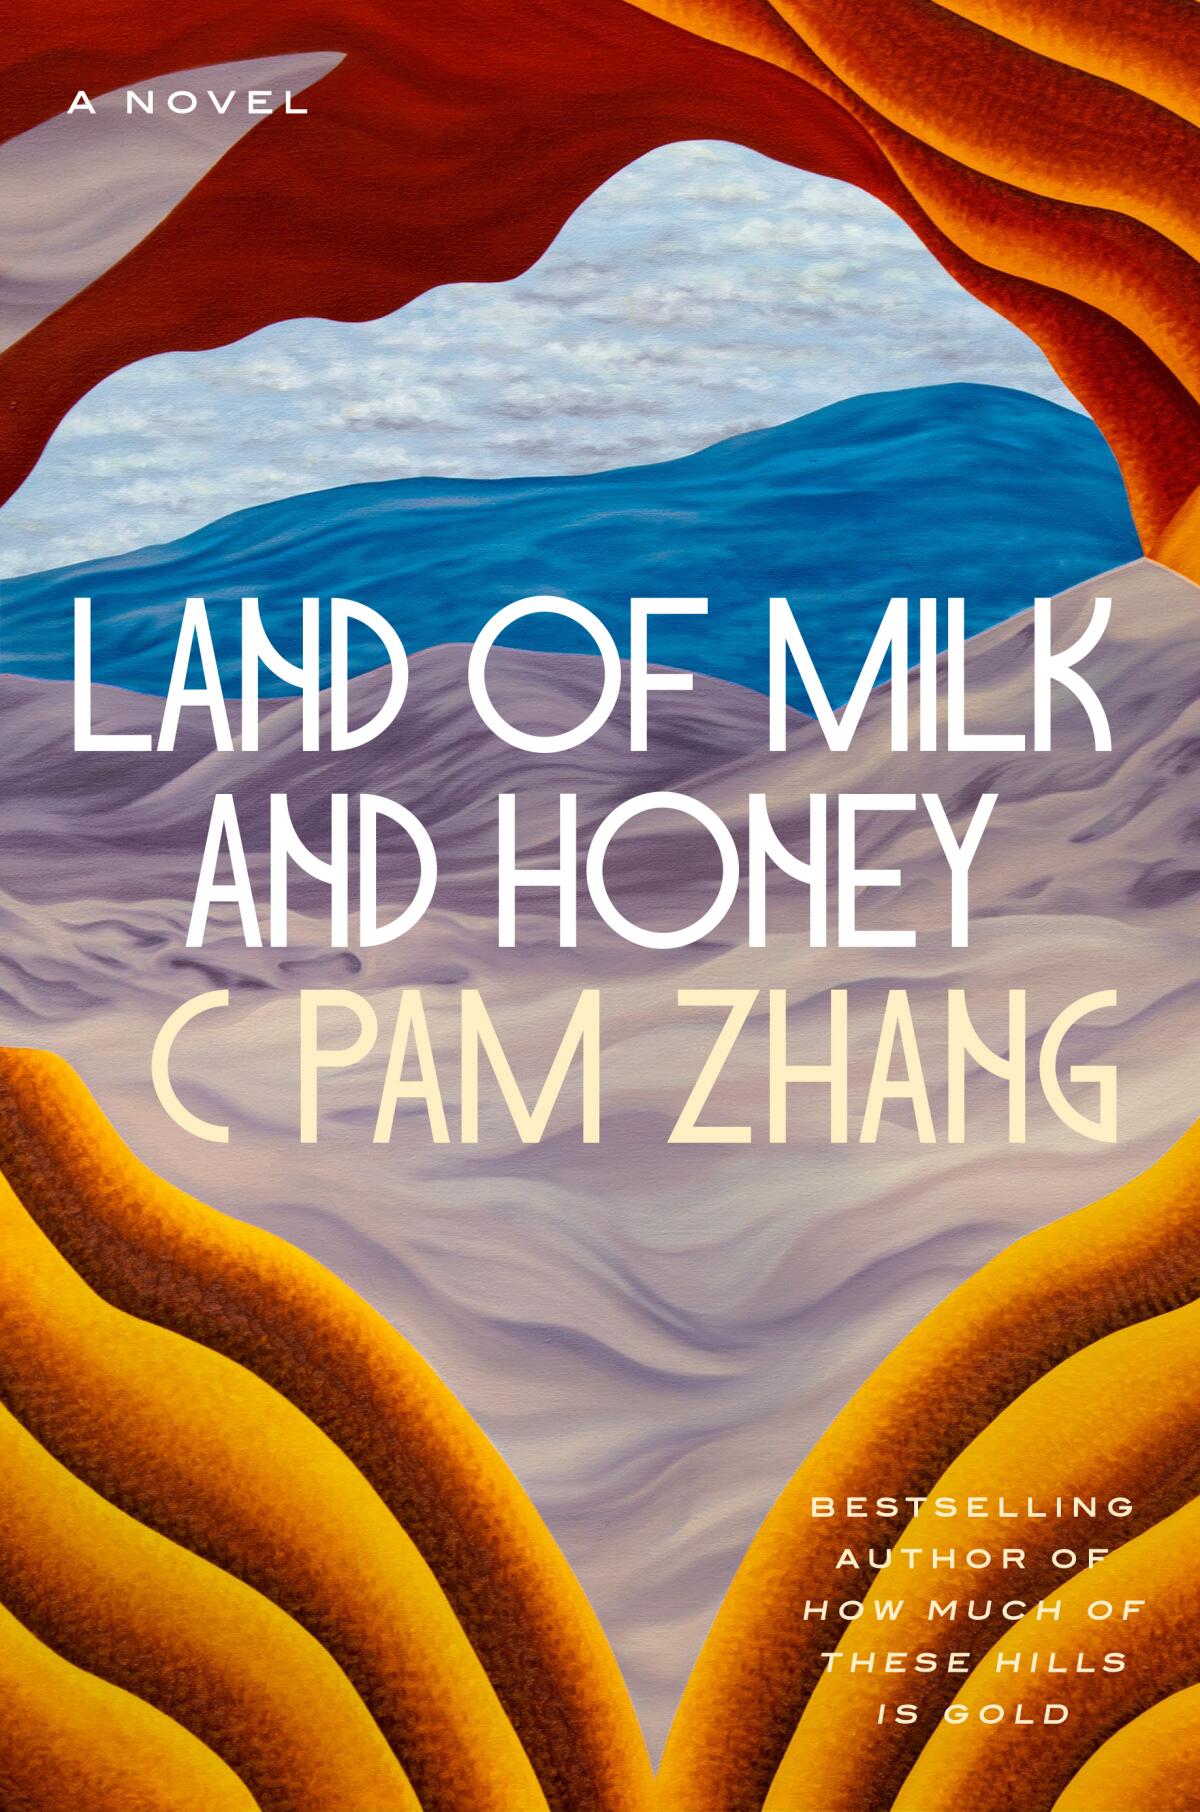 The cover of "Land of Milk and Honey," featuring an abstract illustration of multiple colors reflecting land and water.